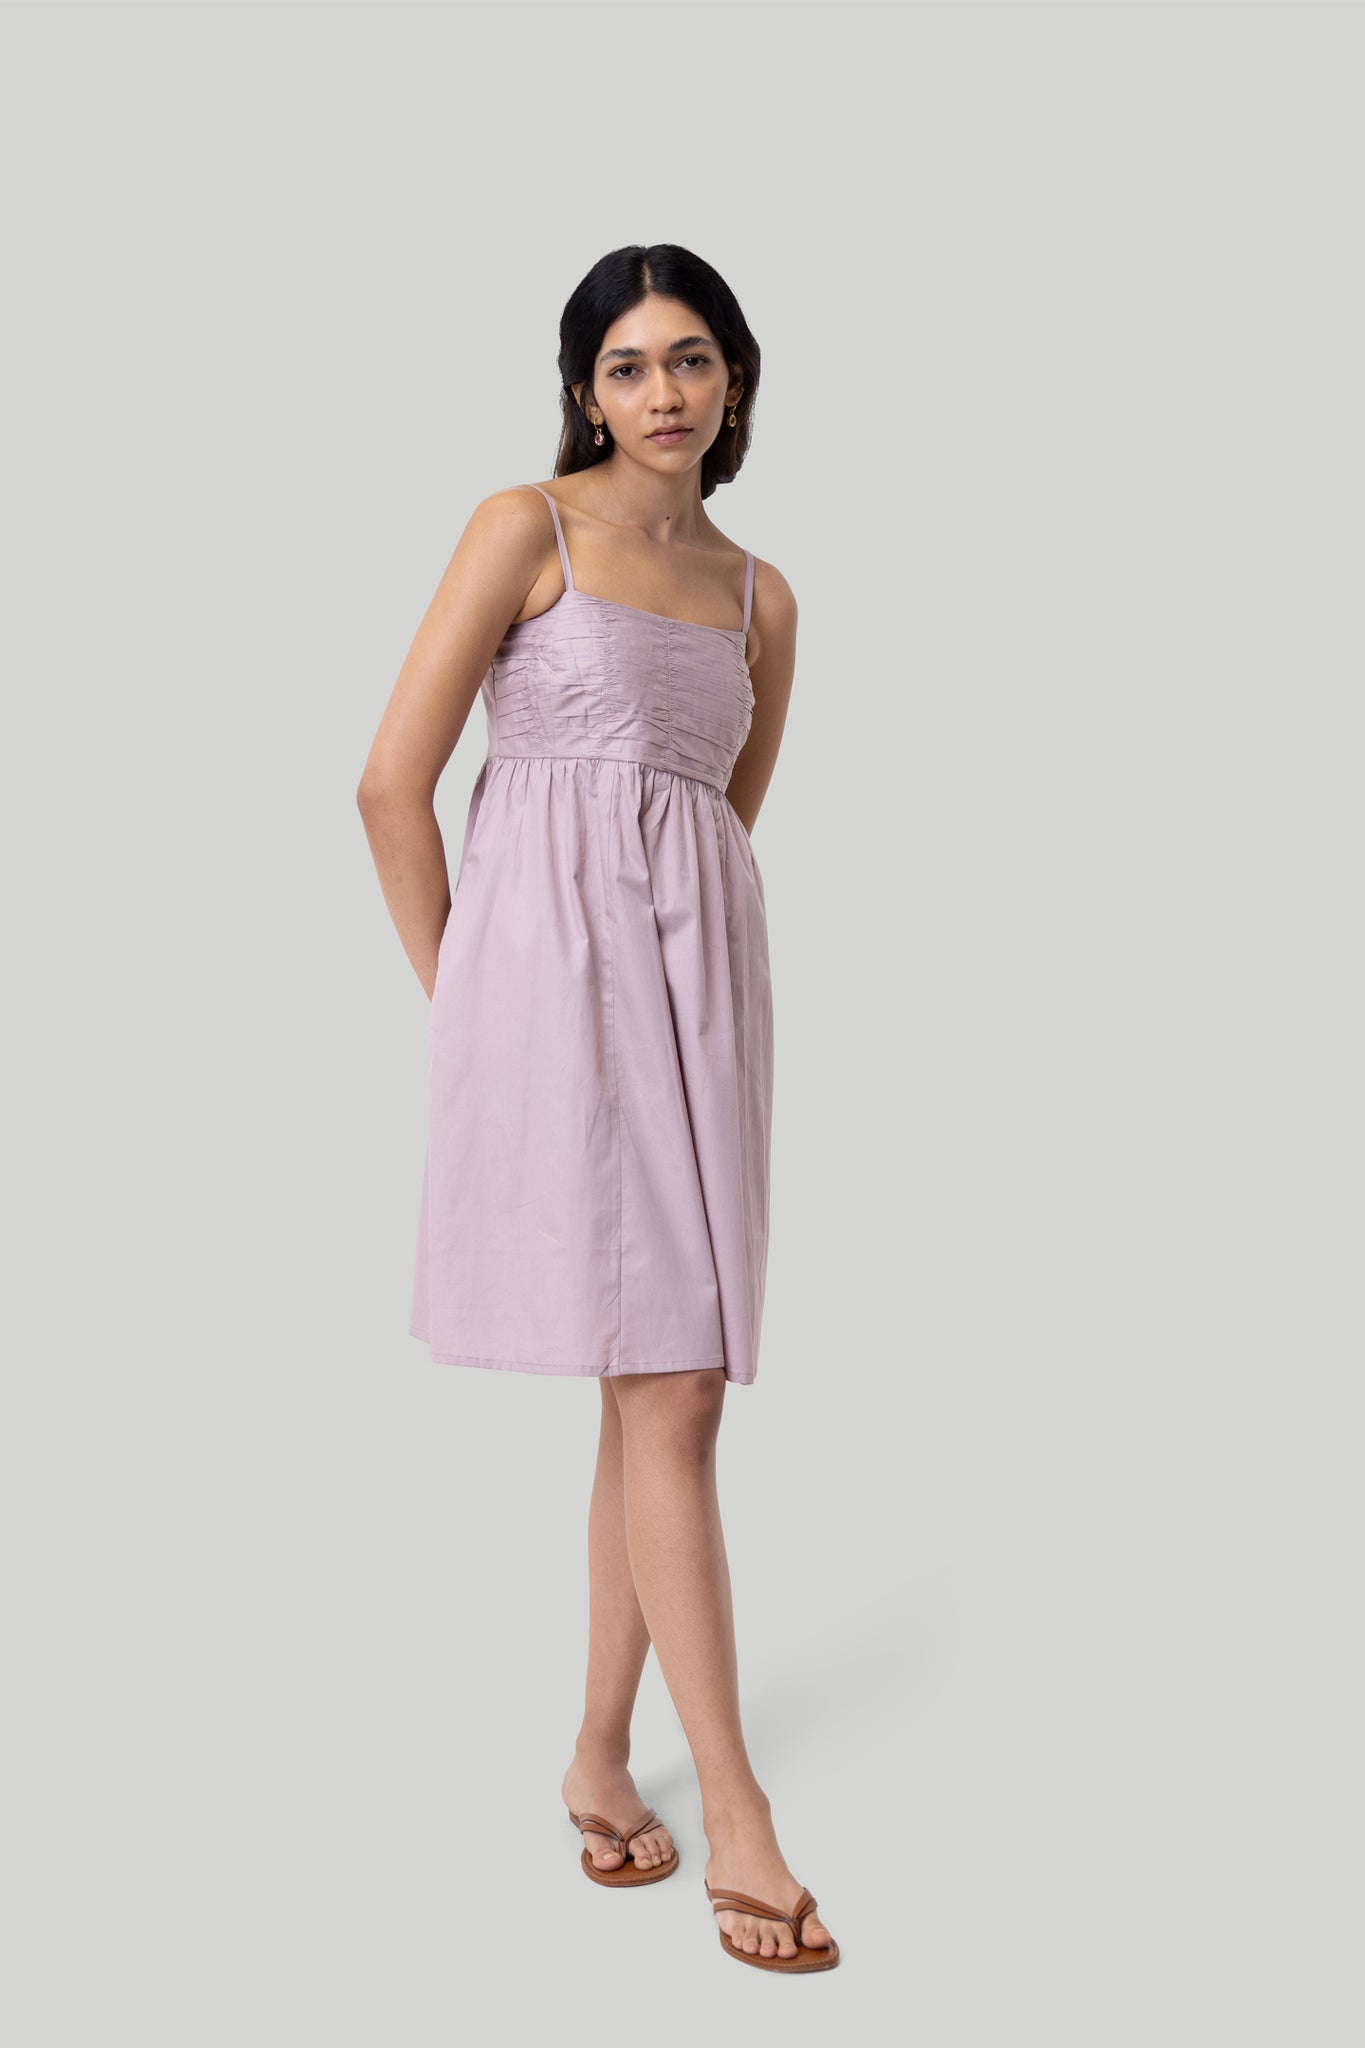 Ruched Strappy Pink Mini Dress 01